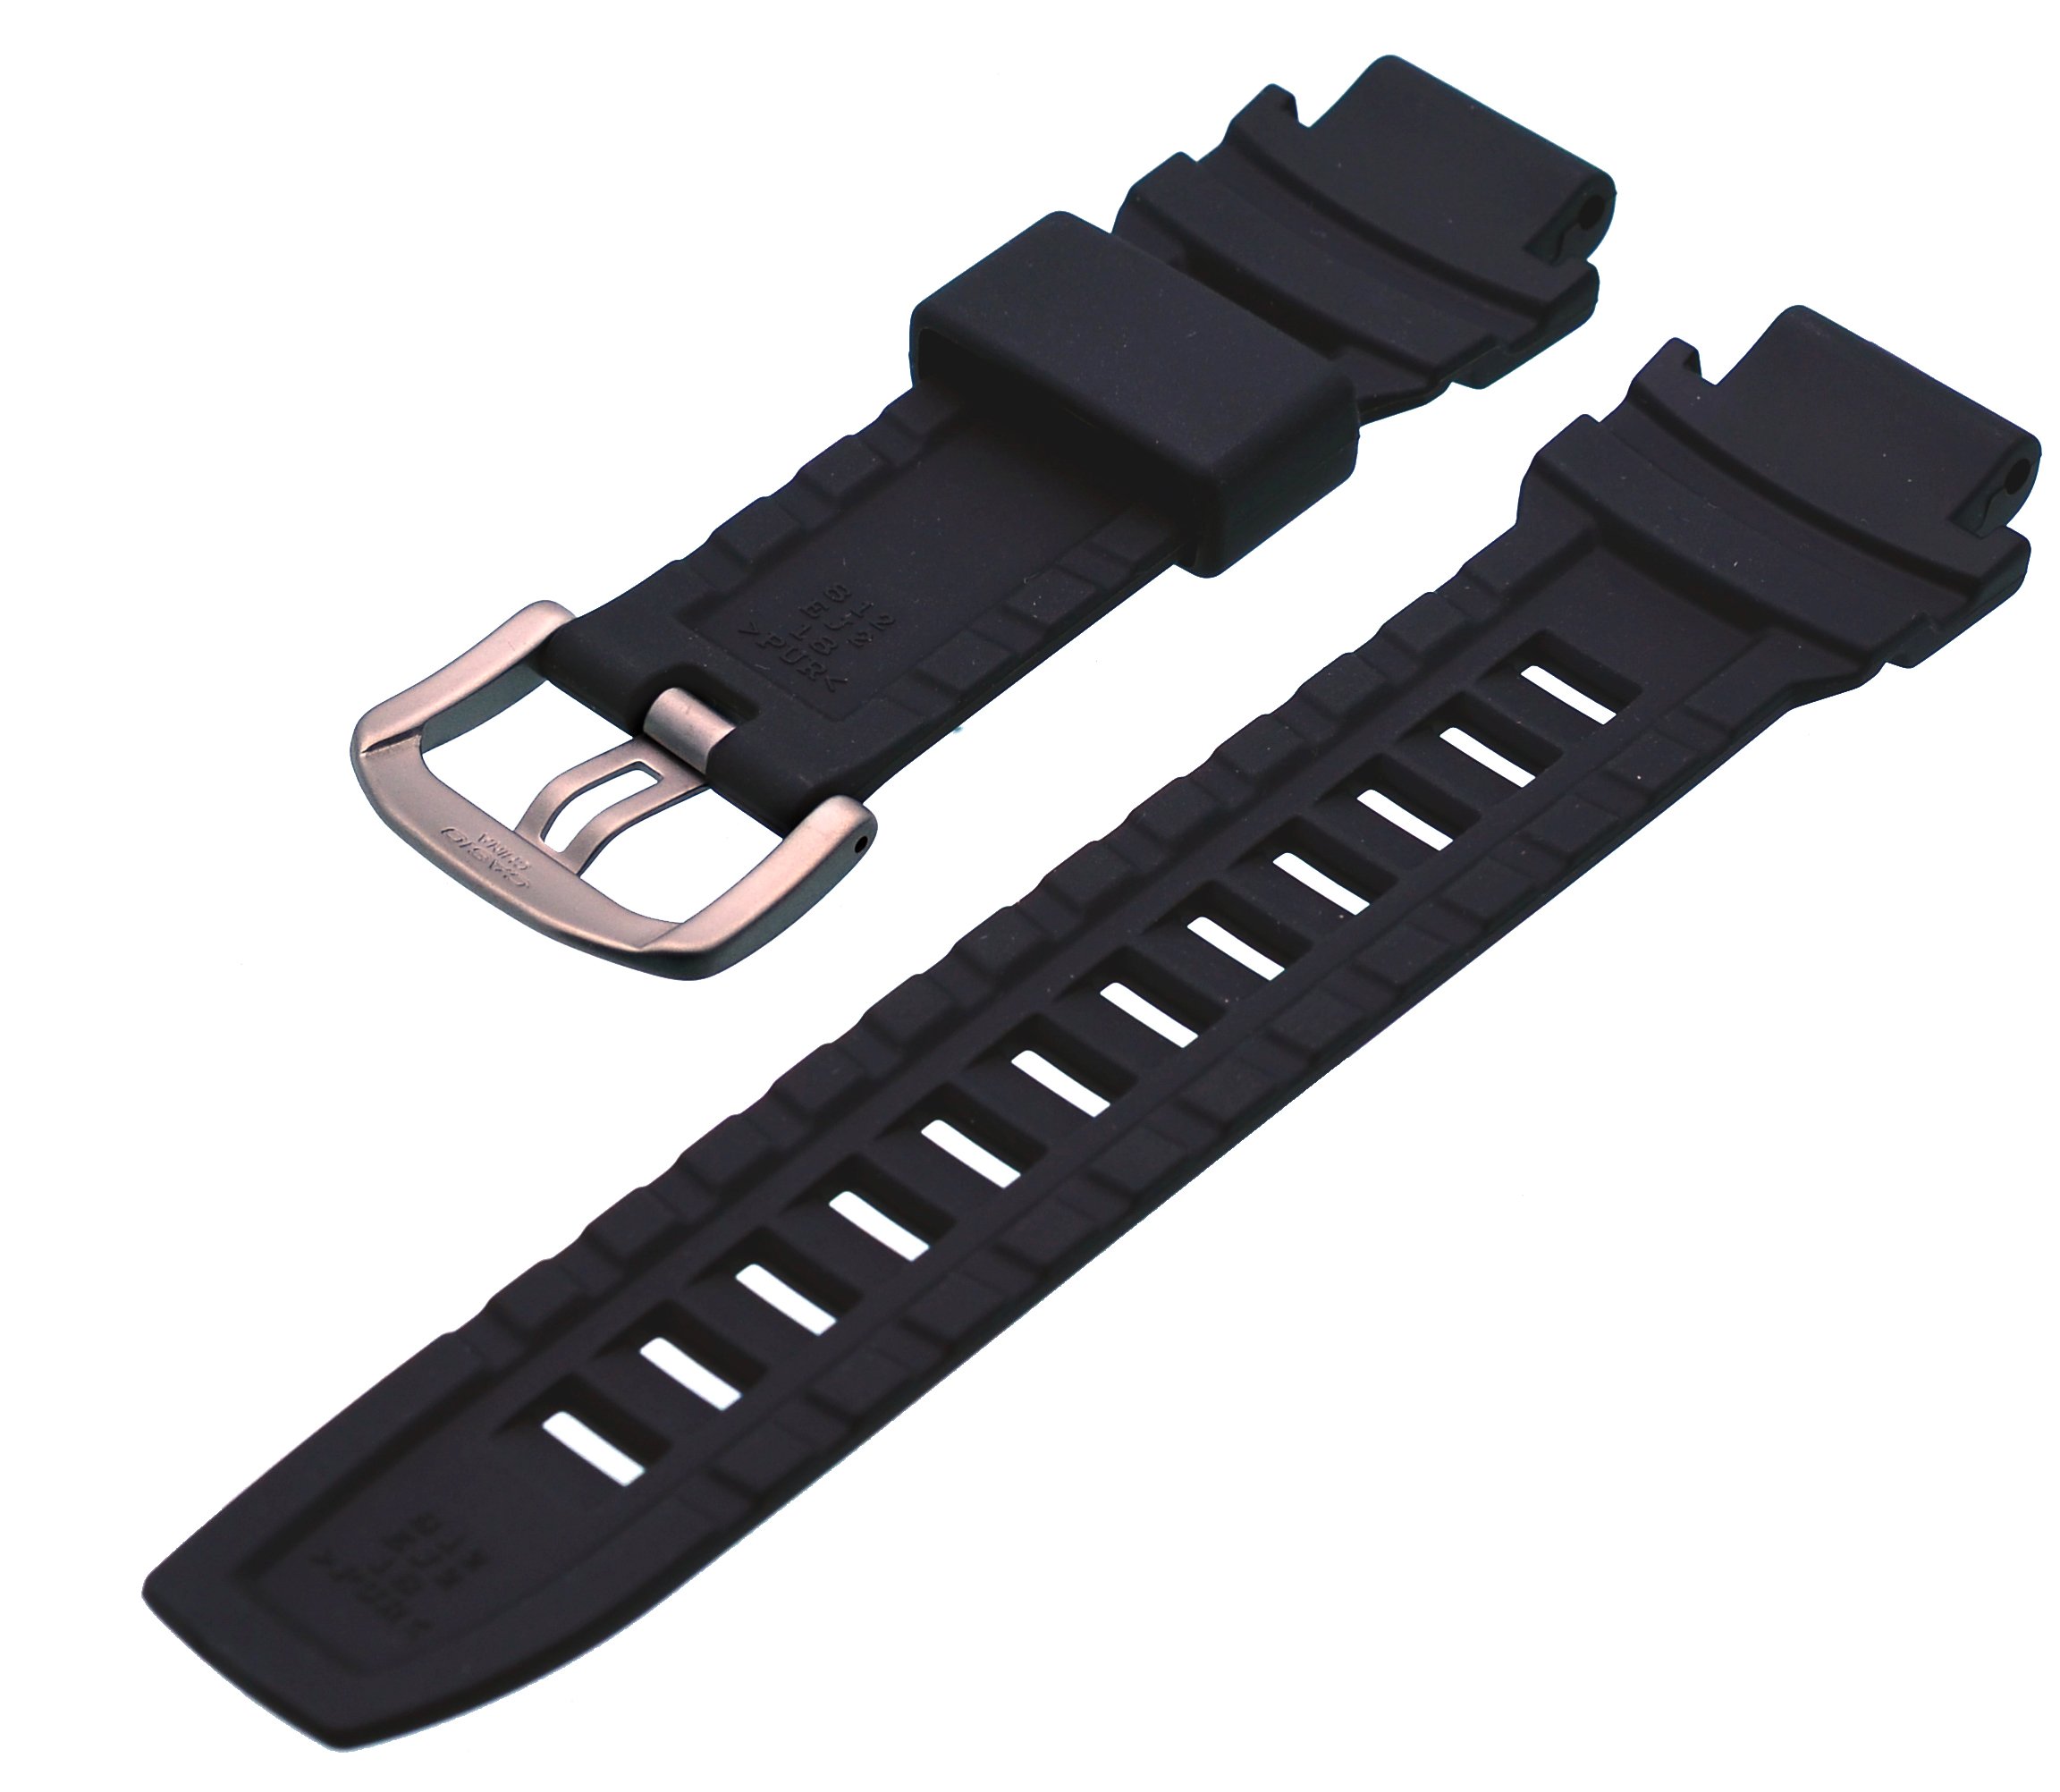 Casio 10412702 Genuine Factory Pathfinder Replacement Band - PRG260, PRG550, PRW3500